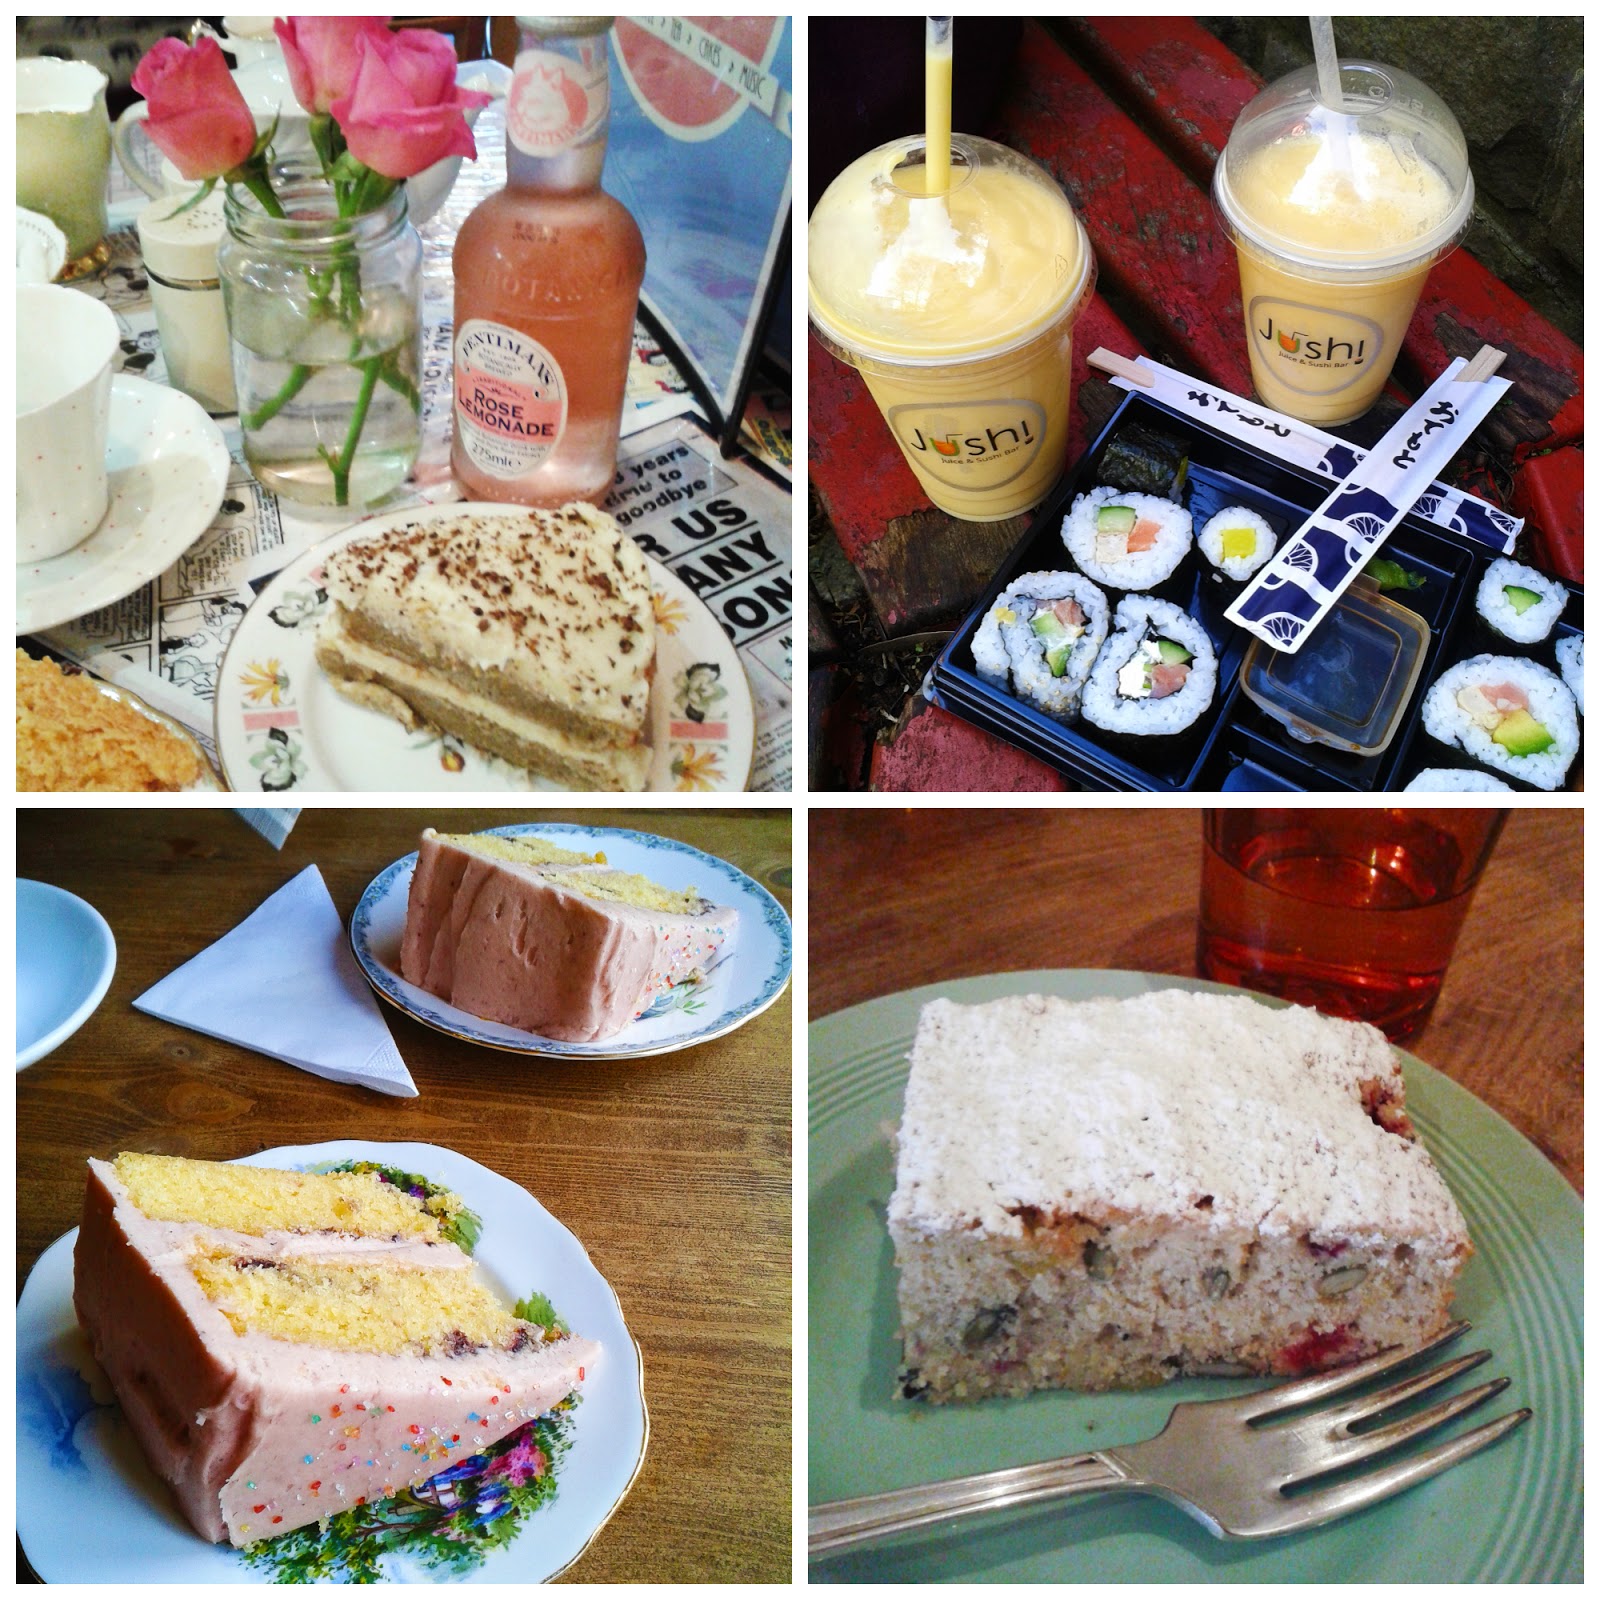 Birthday food, food, cake, places to eat in Scotland, The Palais Tearoom Dundee, Jushi Dundee, Kitschnbake cafe Newport, Spoon restaurant Edinburgh, birthday outings Scotlnad, Birthday inspiration